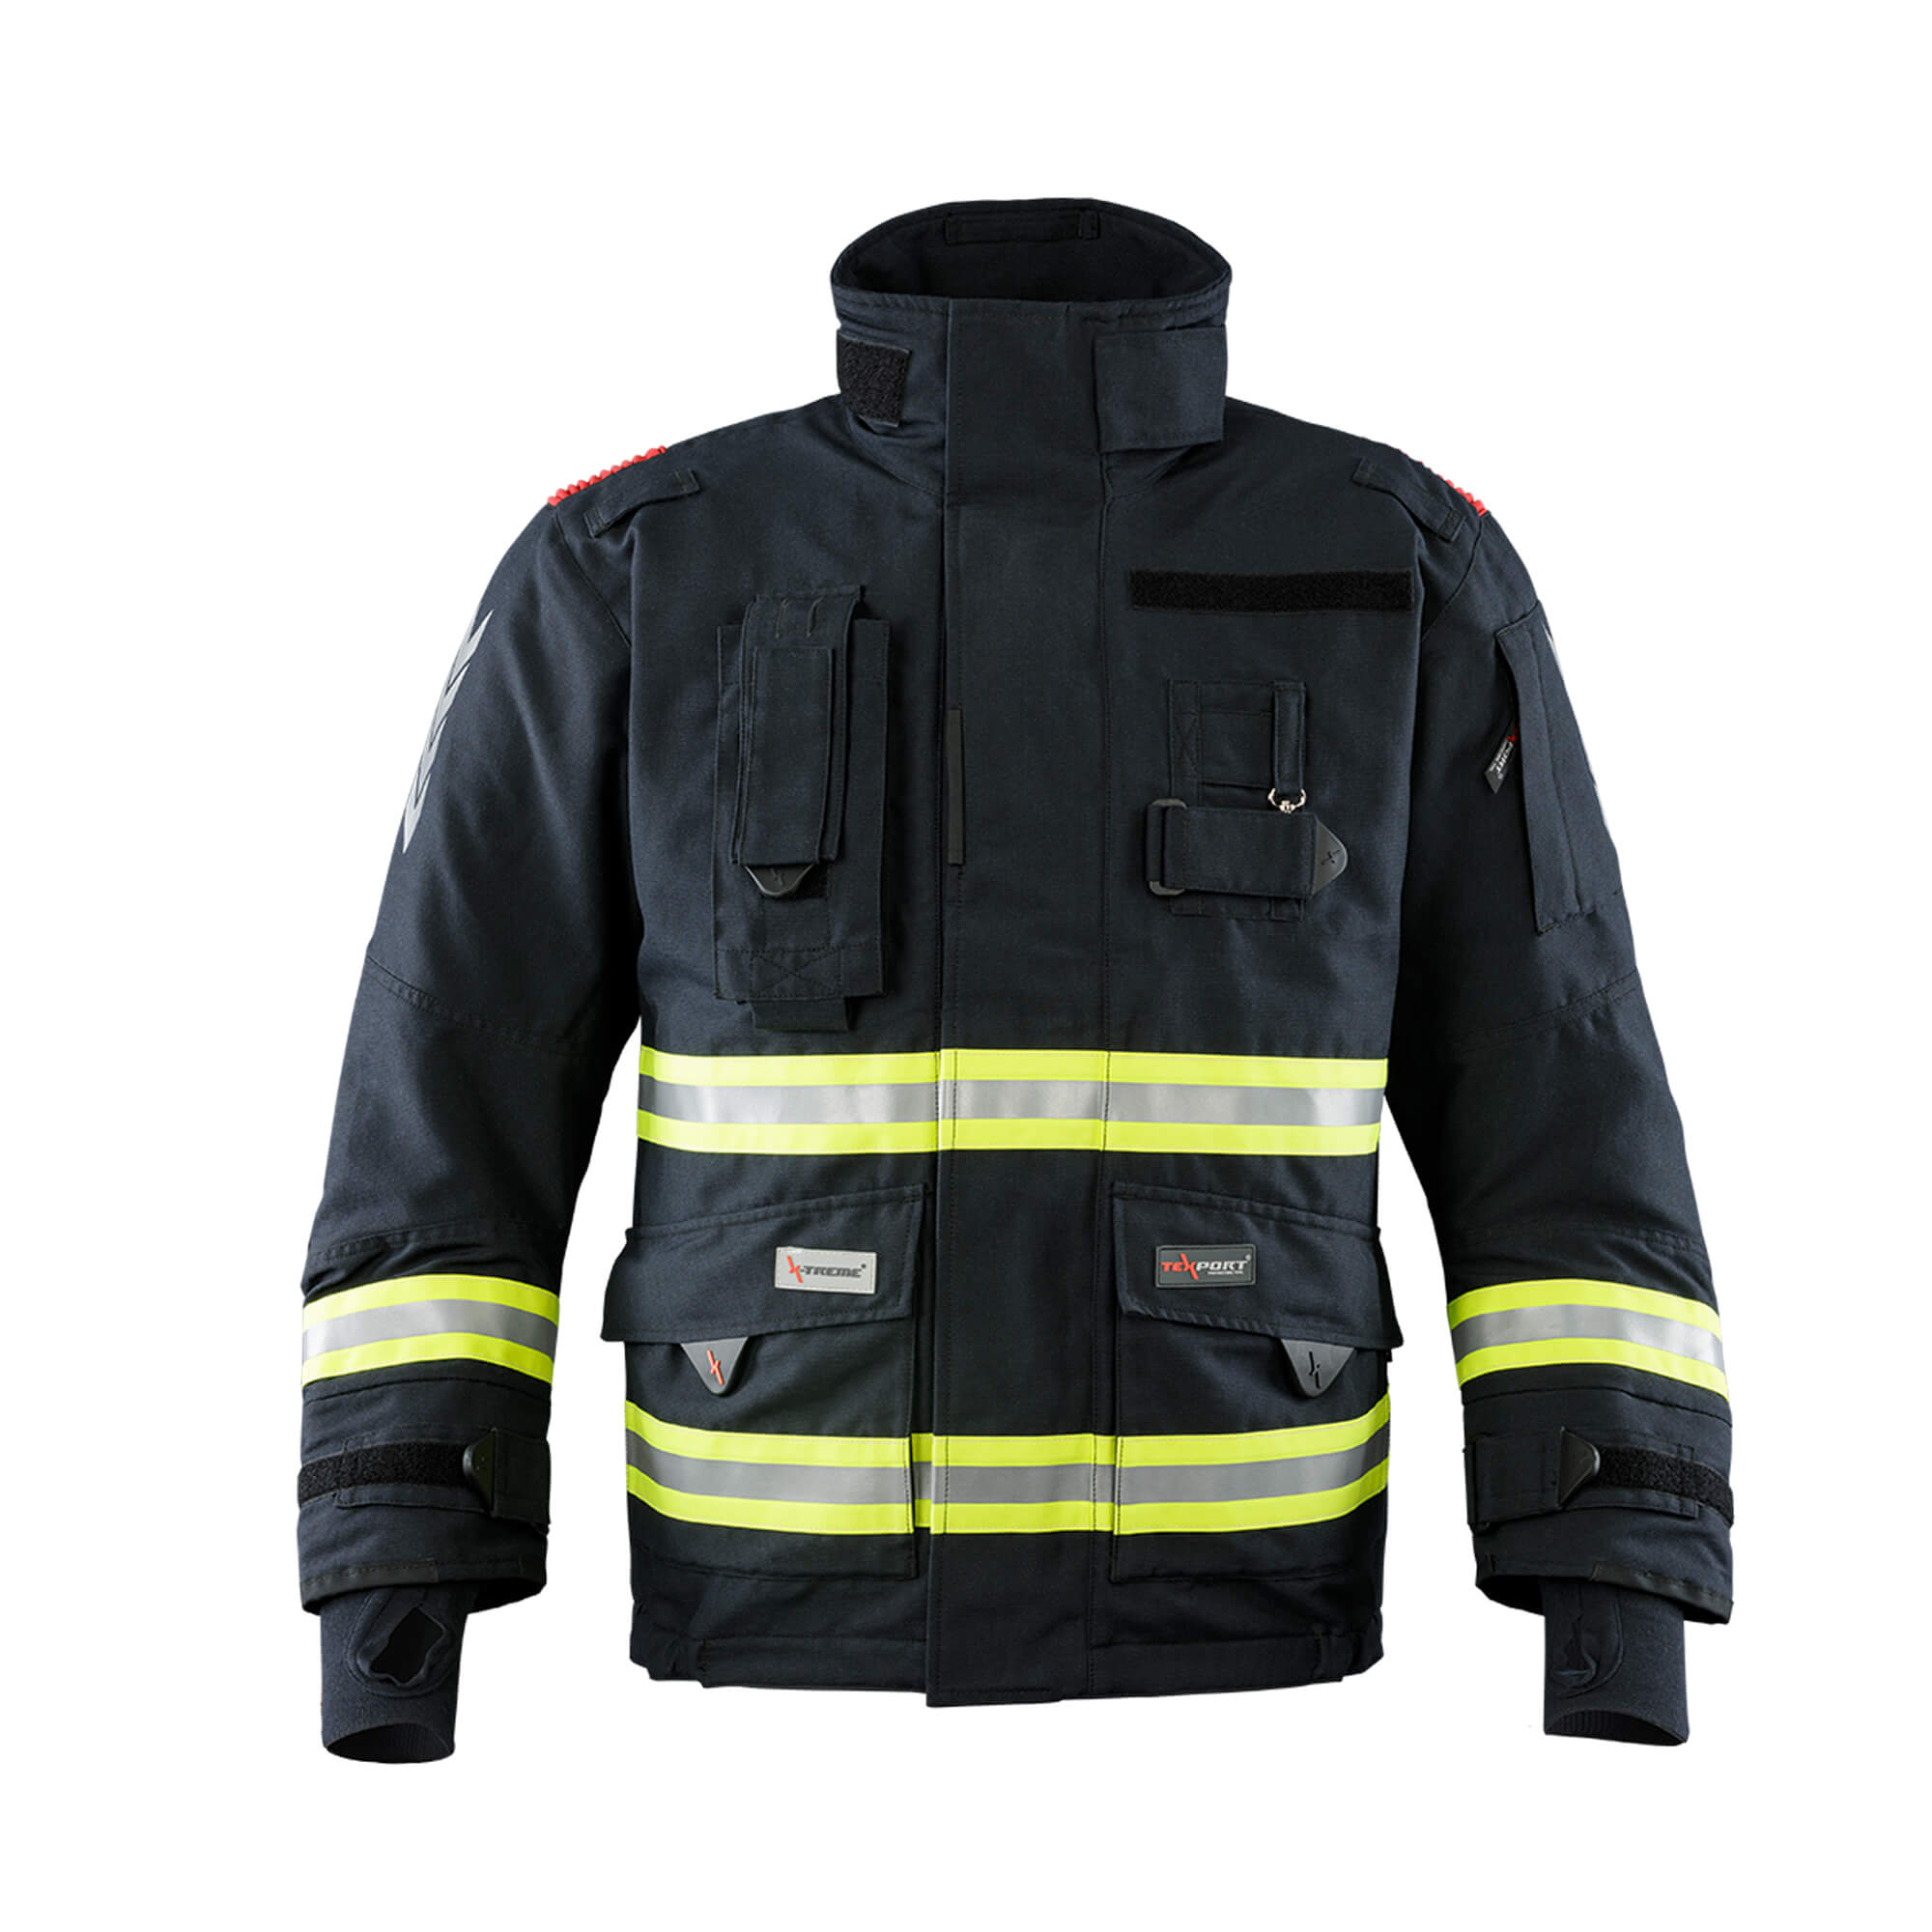 Fire Stretch Suit for interventions